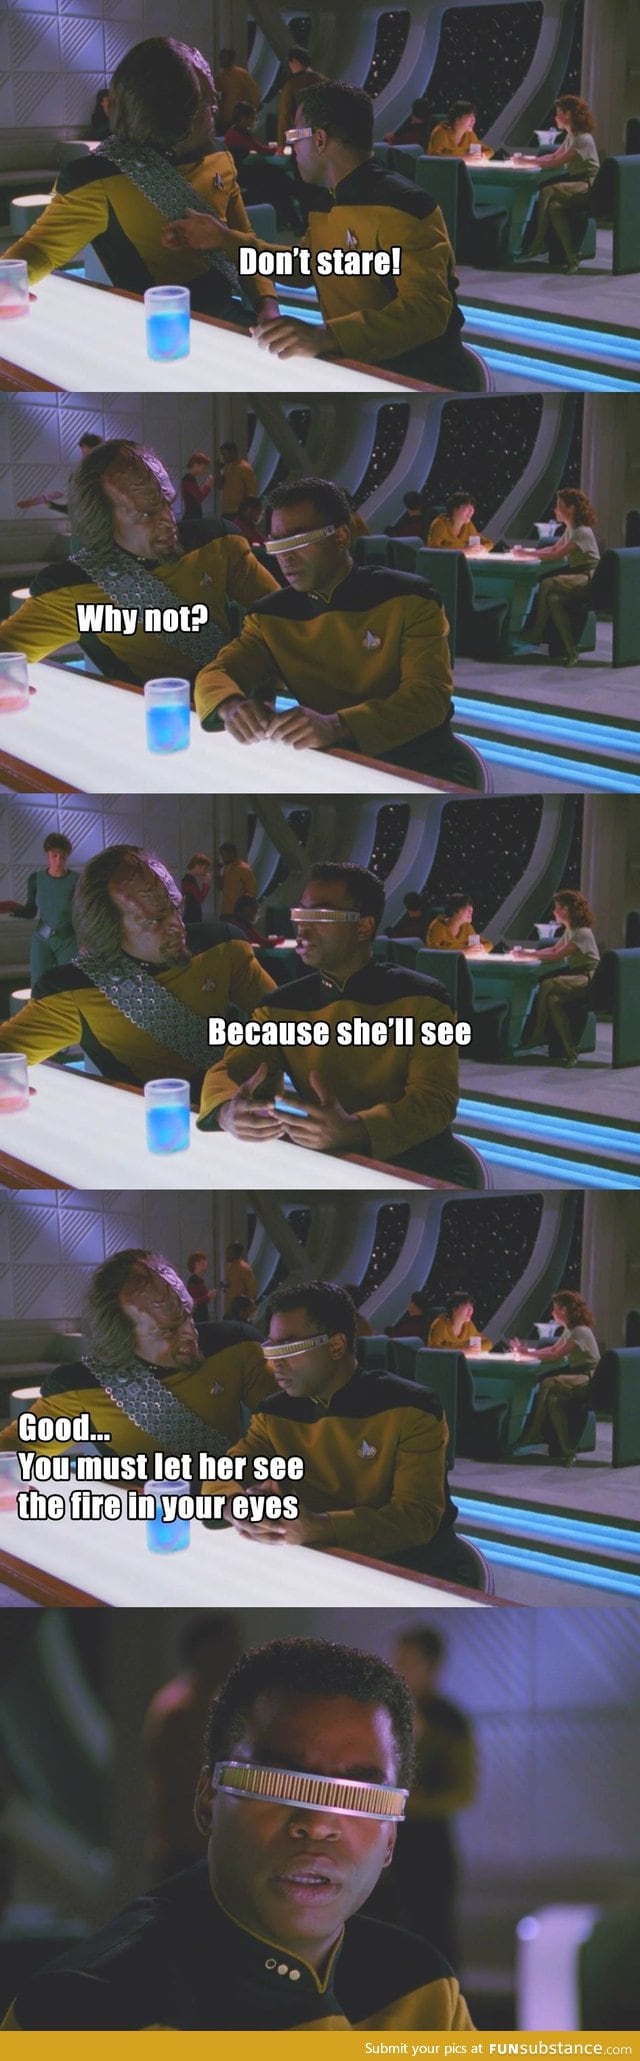 Worf is kind of a jerk